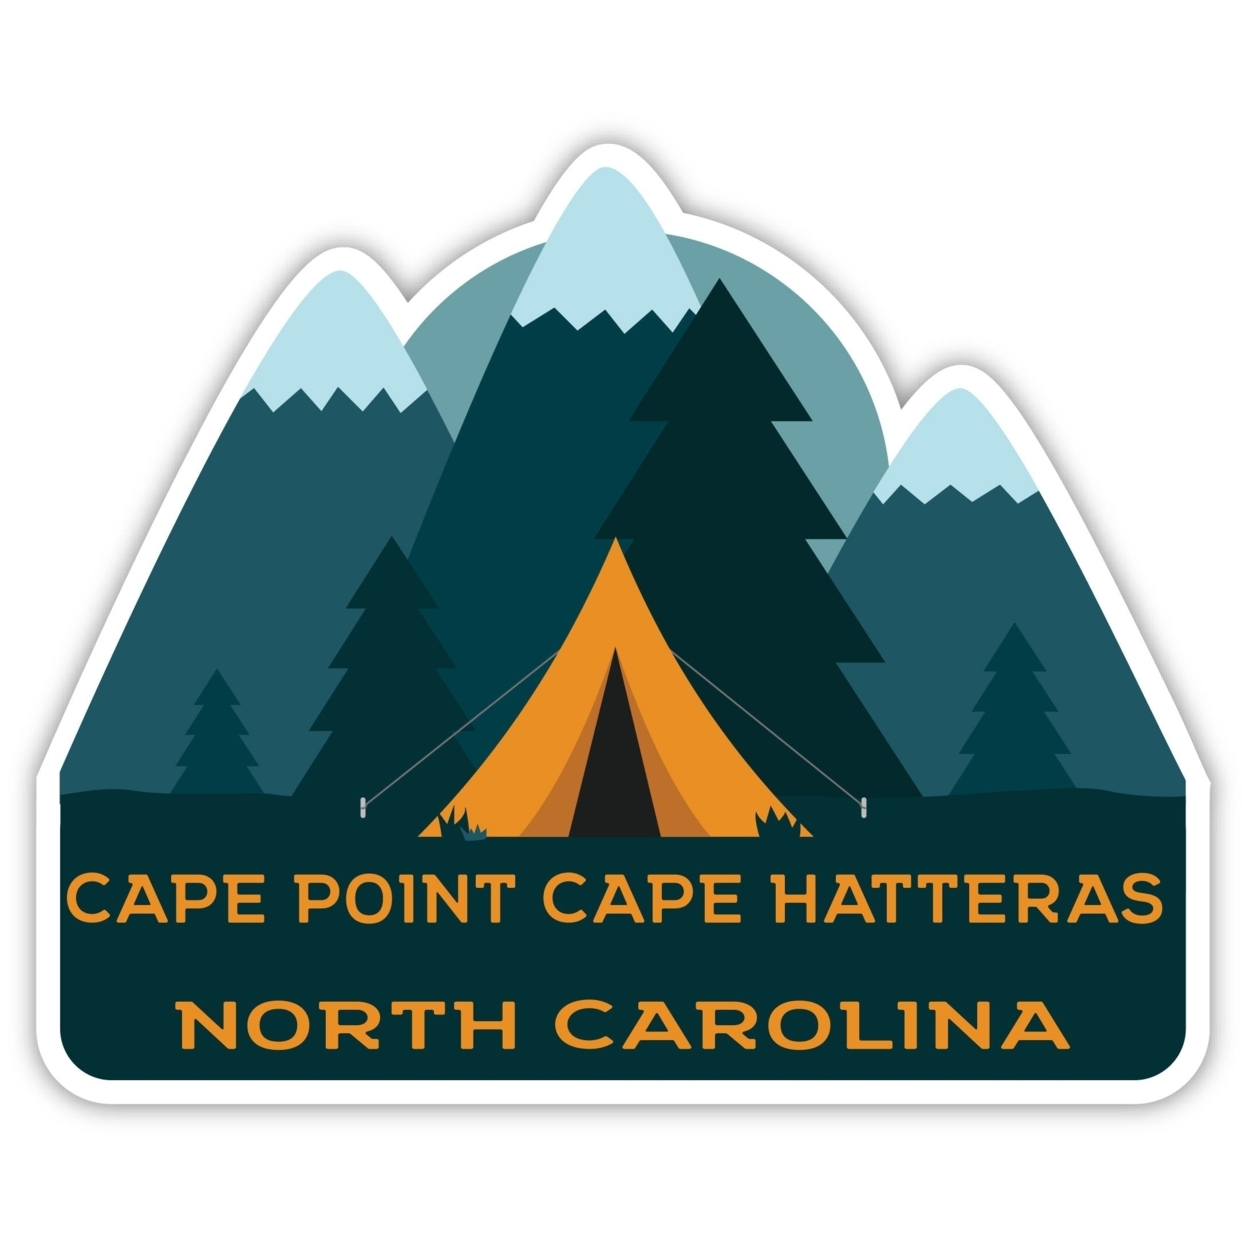 Cape Point Cape Hatteras North Carolina Souvenir Decorative Stickers (Choose Theme And Size) - 4-Pack, 8-Inch, Tent